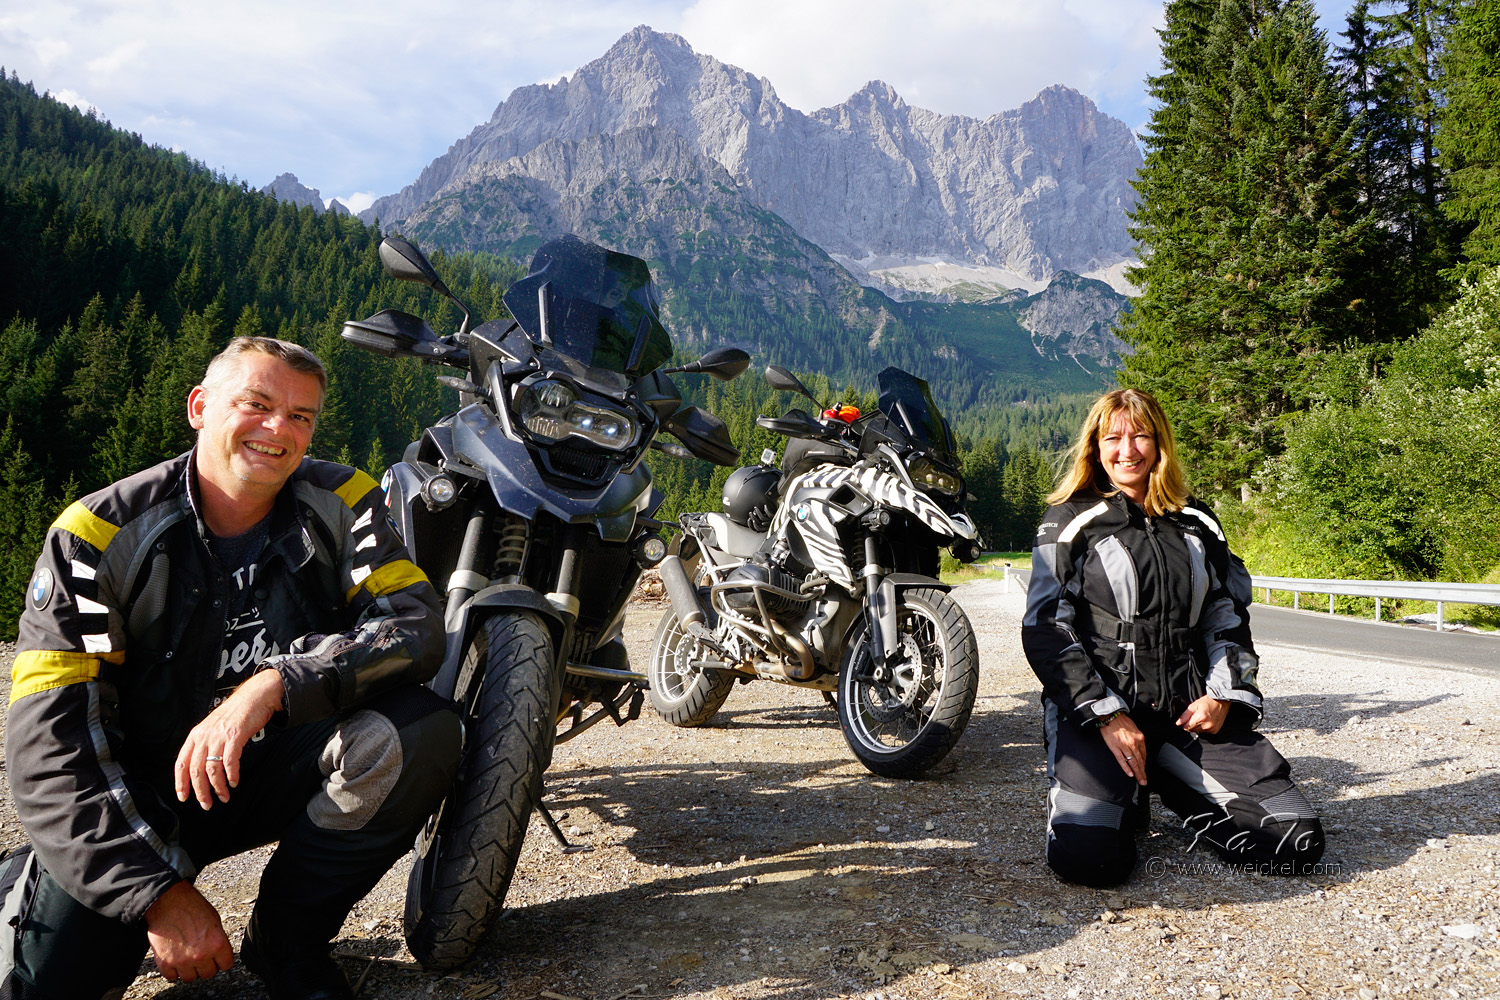 Us - in front of the Dachstein Area